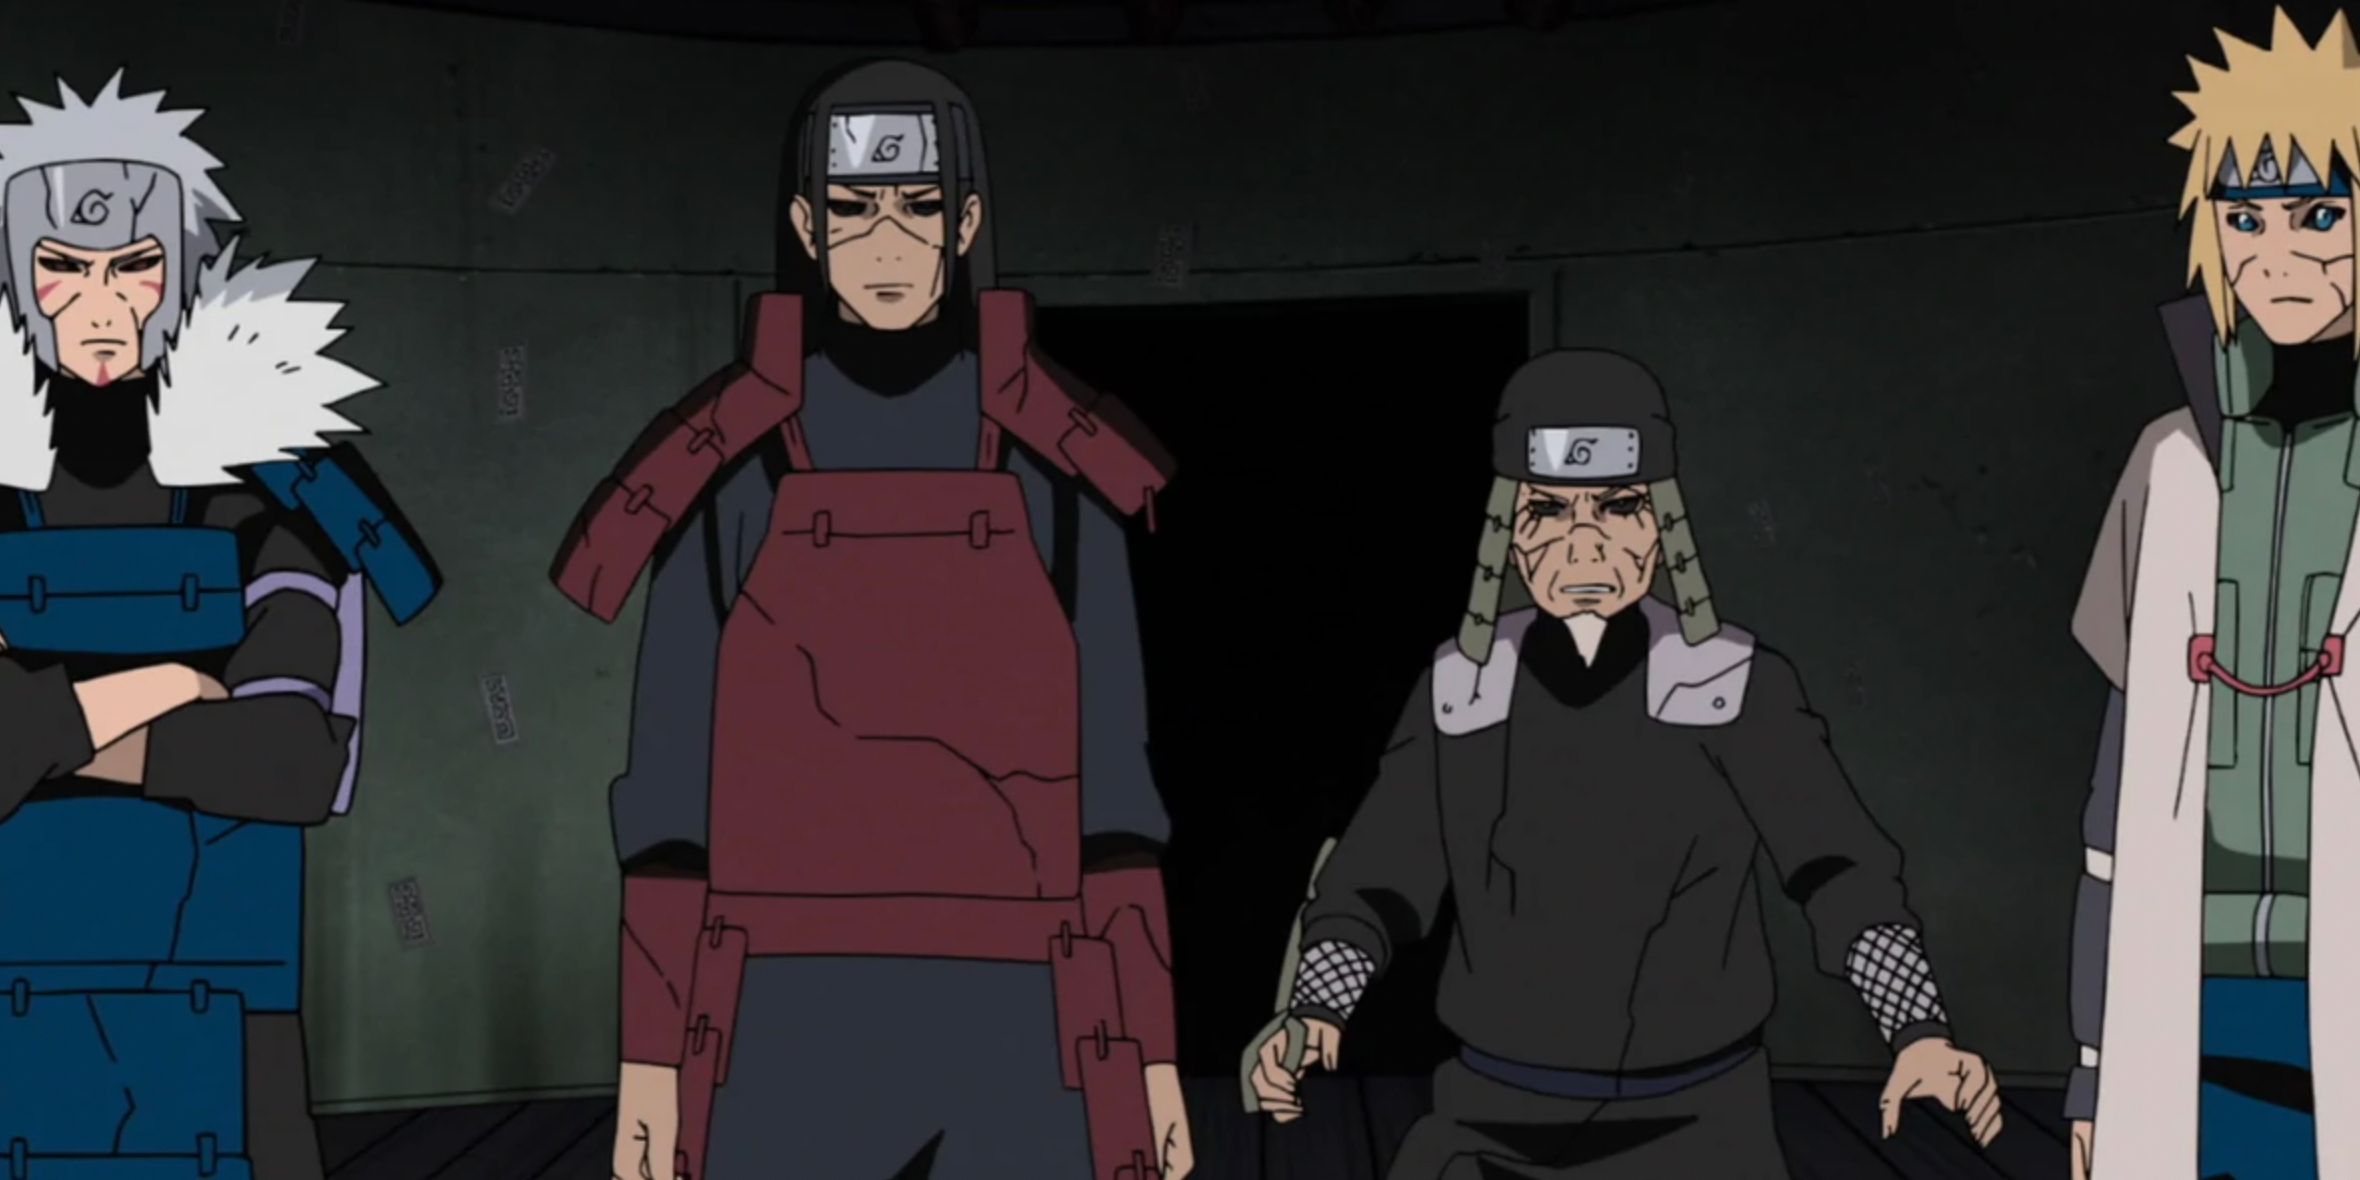 Reanimated hokage stand together in Naruto Shippuden